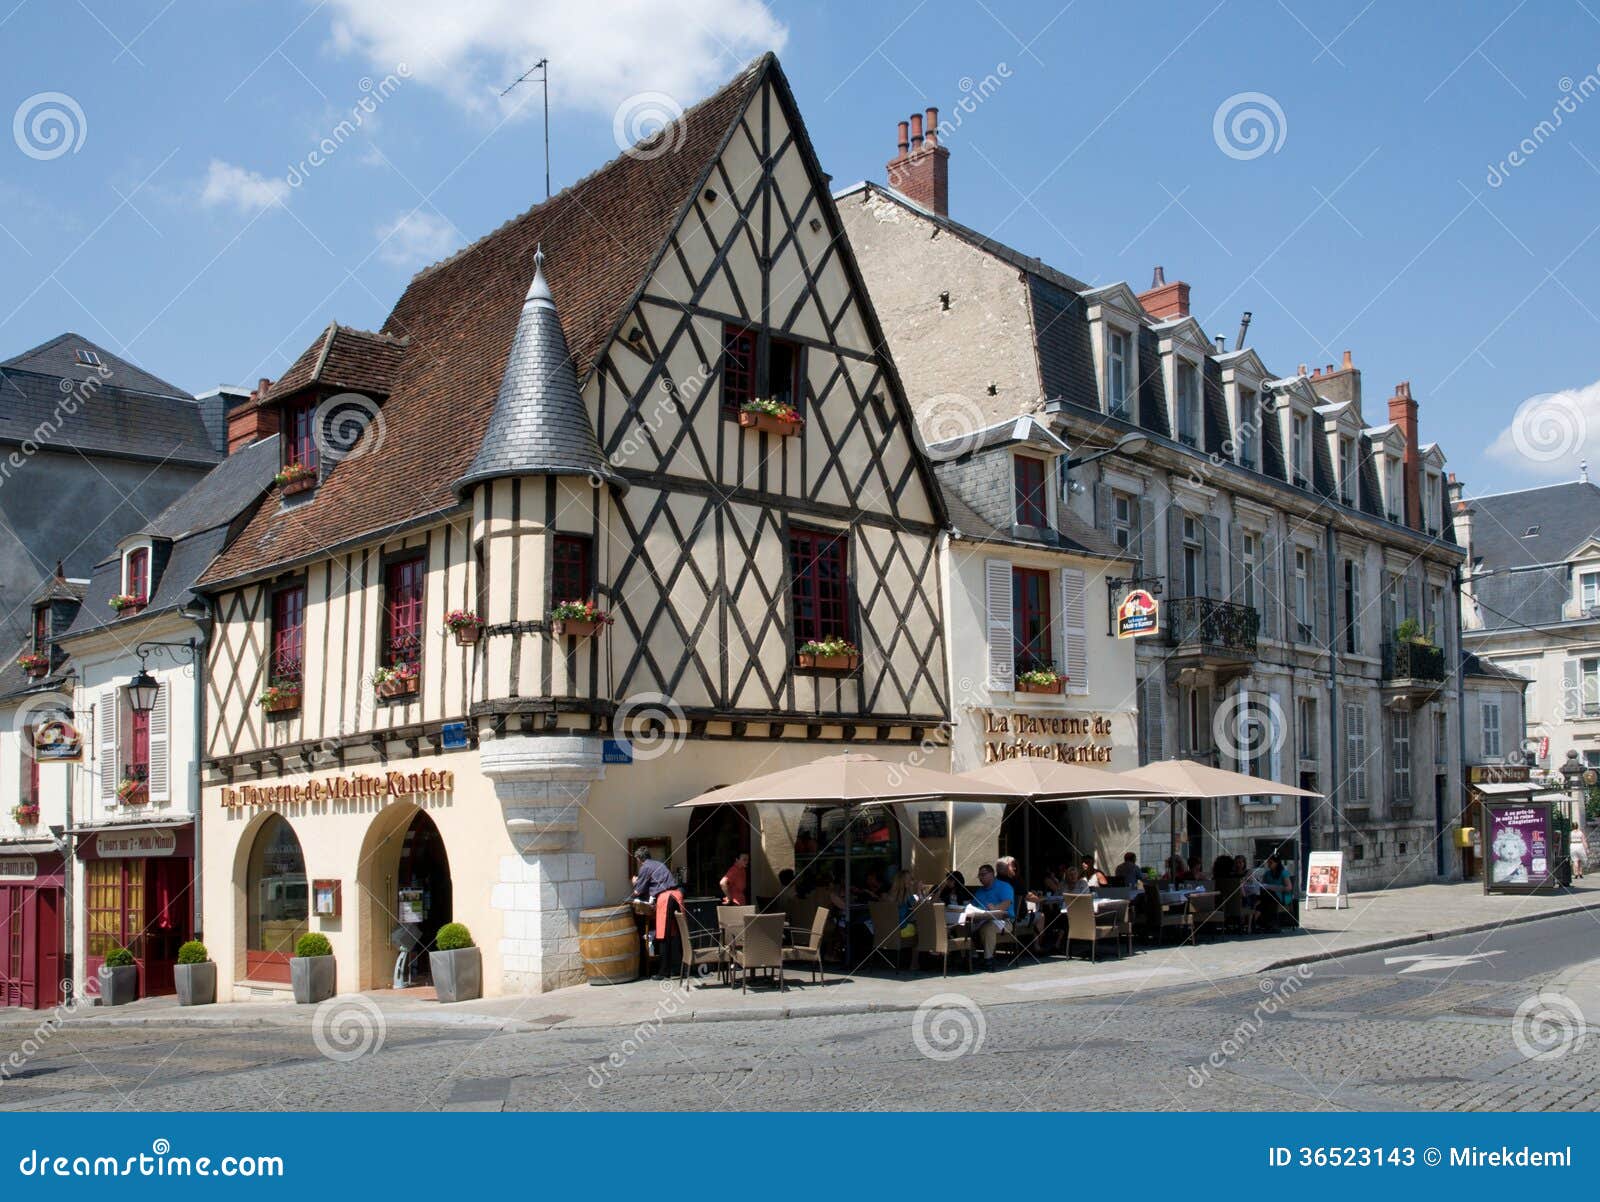 What is Bourges France known for?